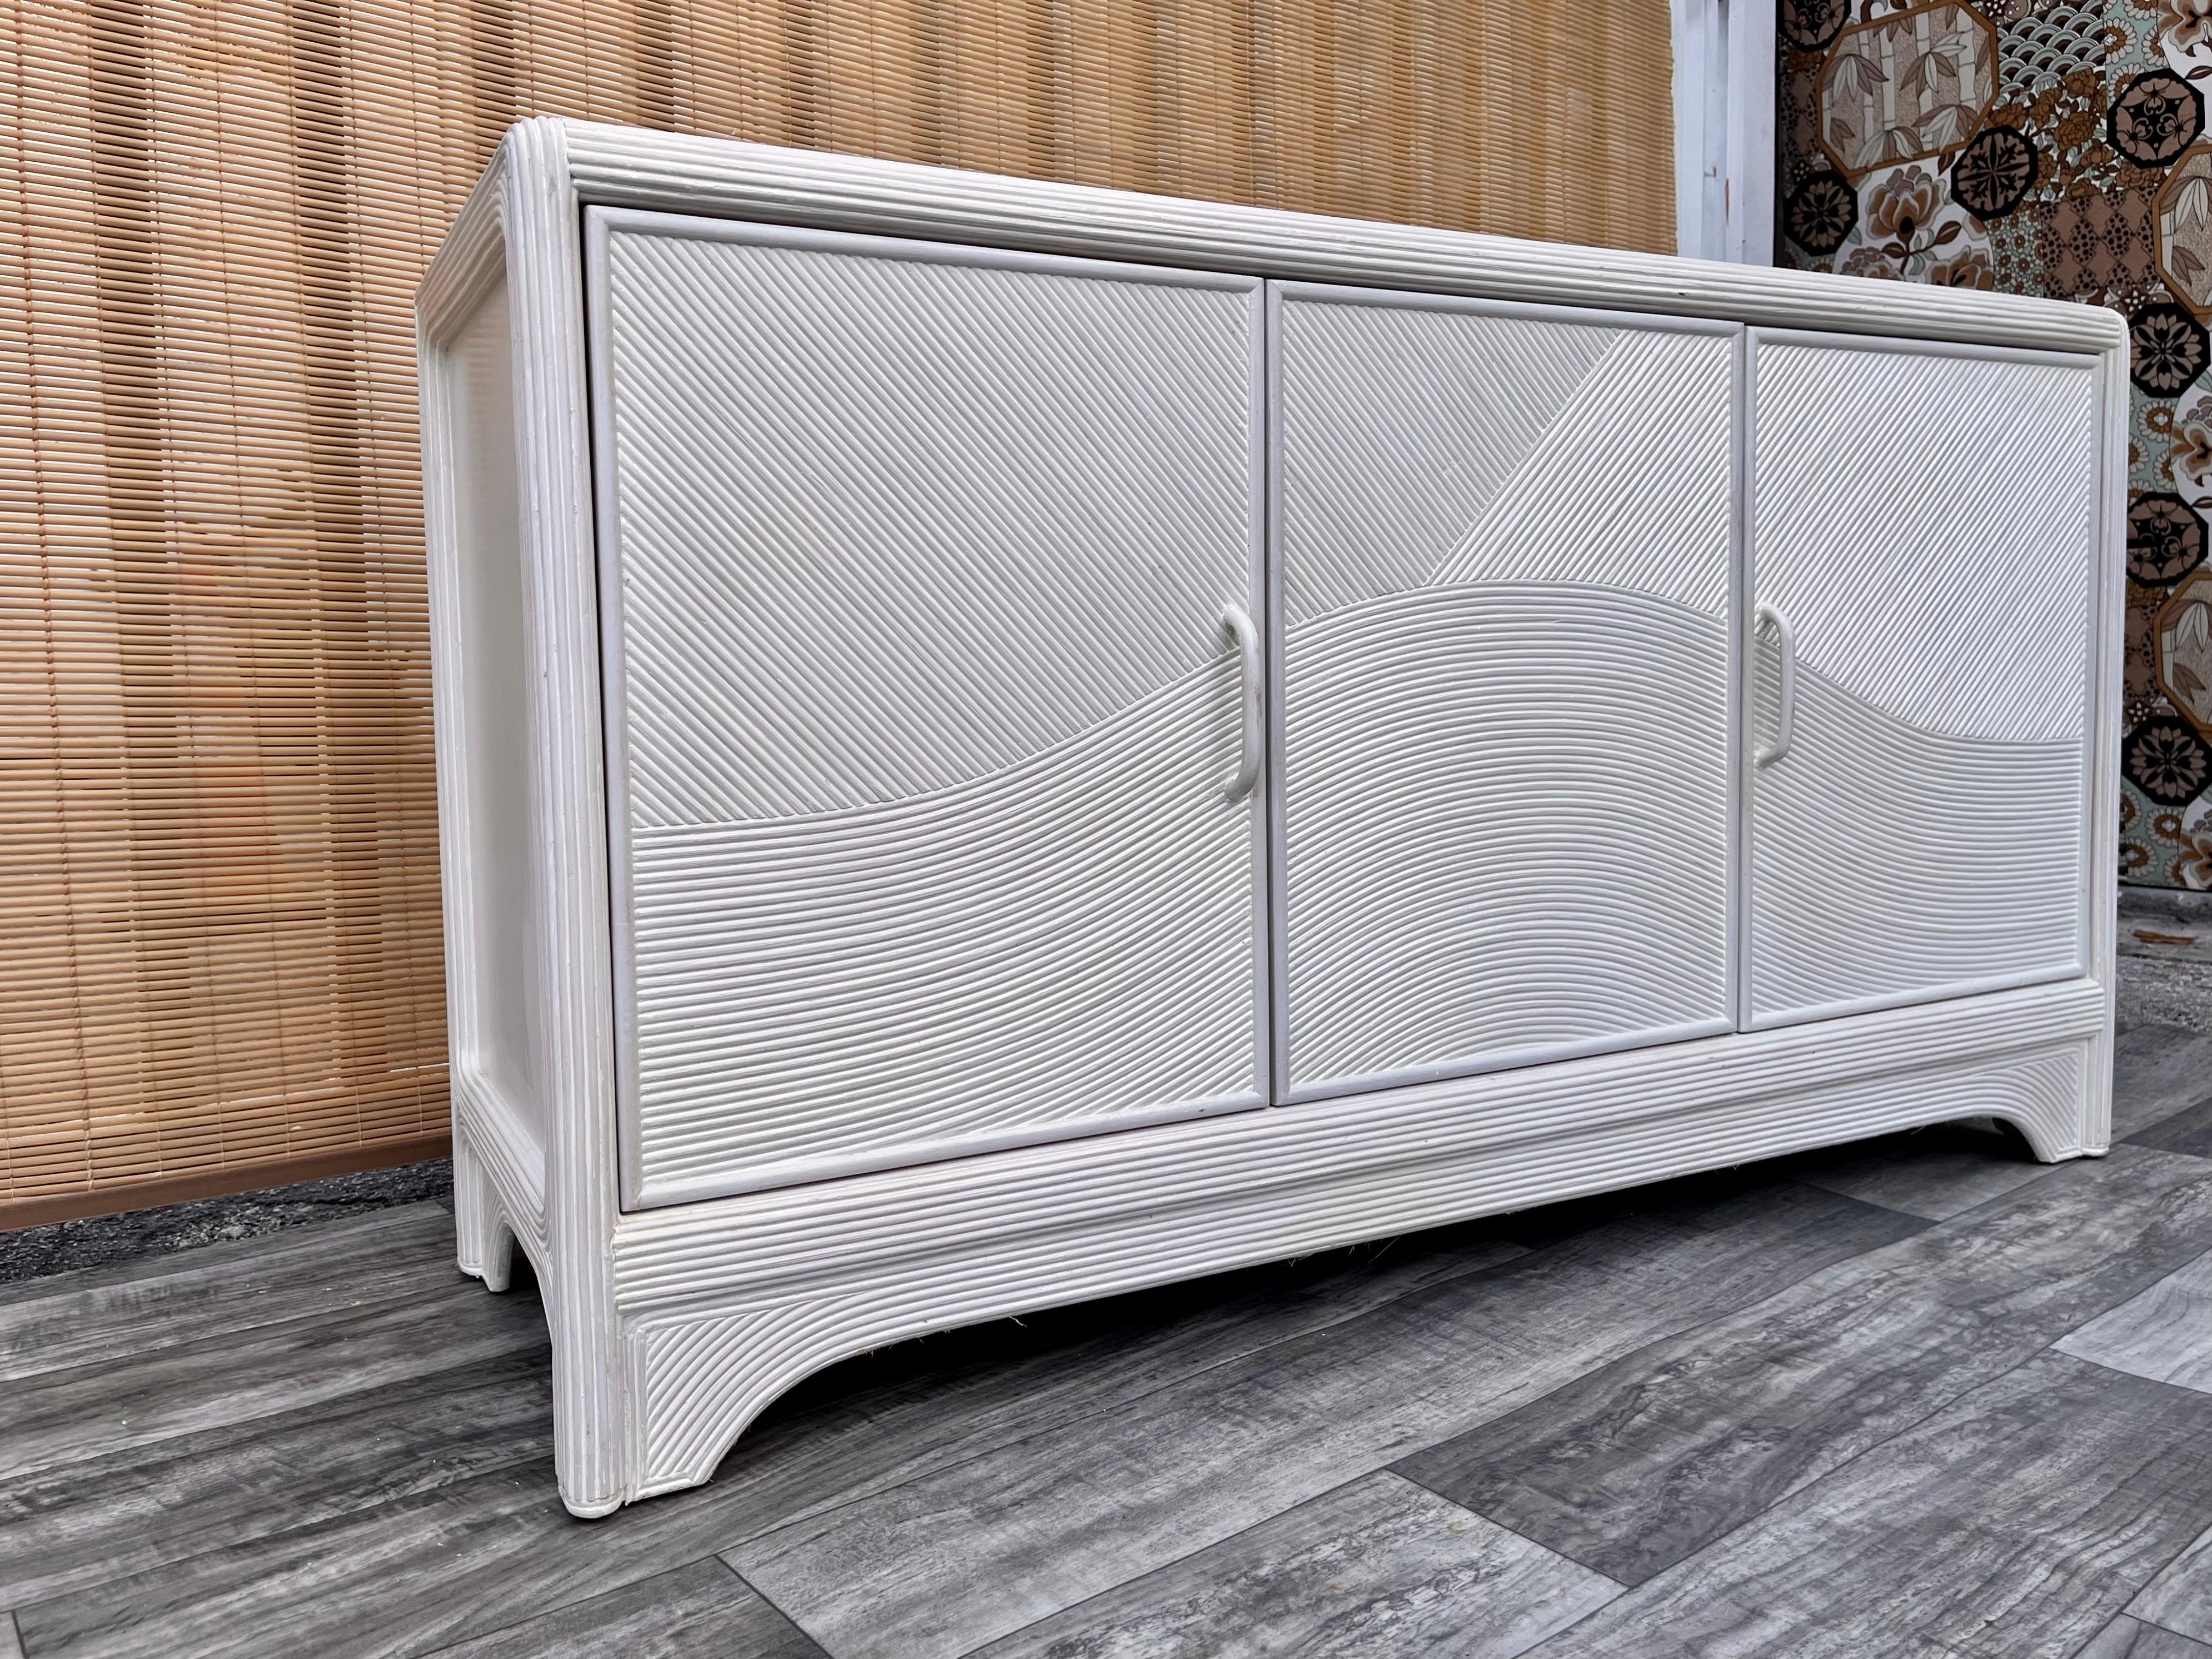 American Coastal Style Pencil Reed Sideboard/ Credenza in the Gabriella Crespi Manner